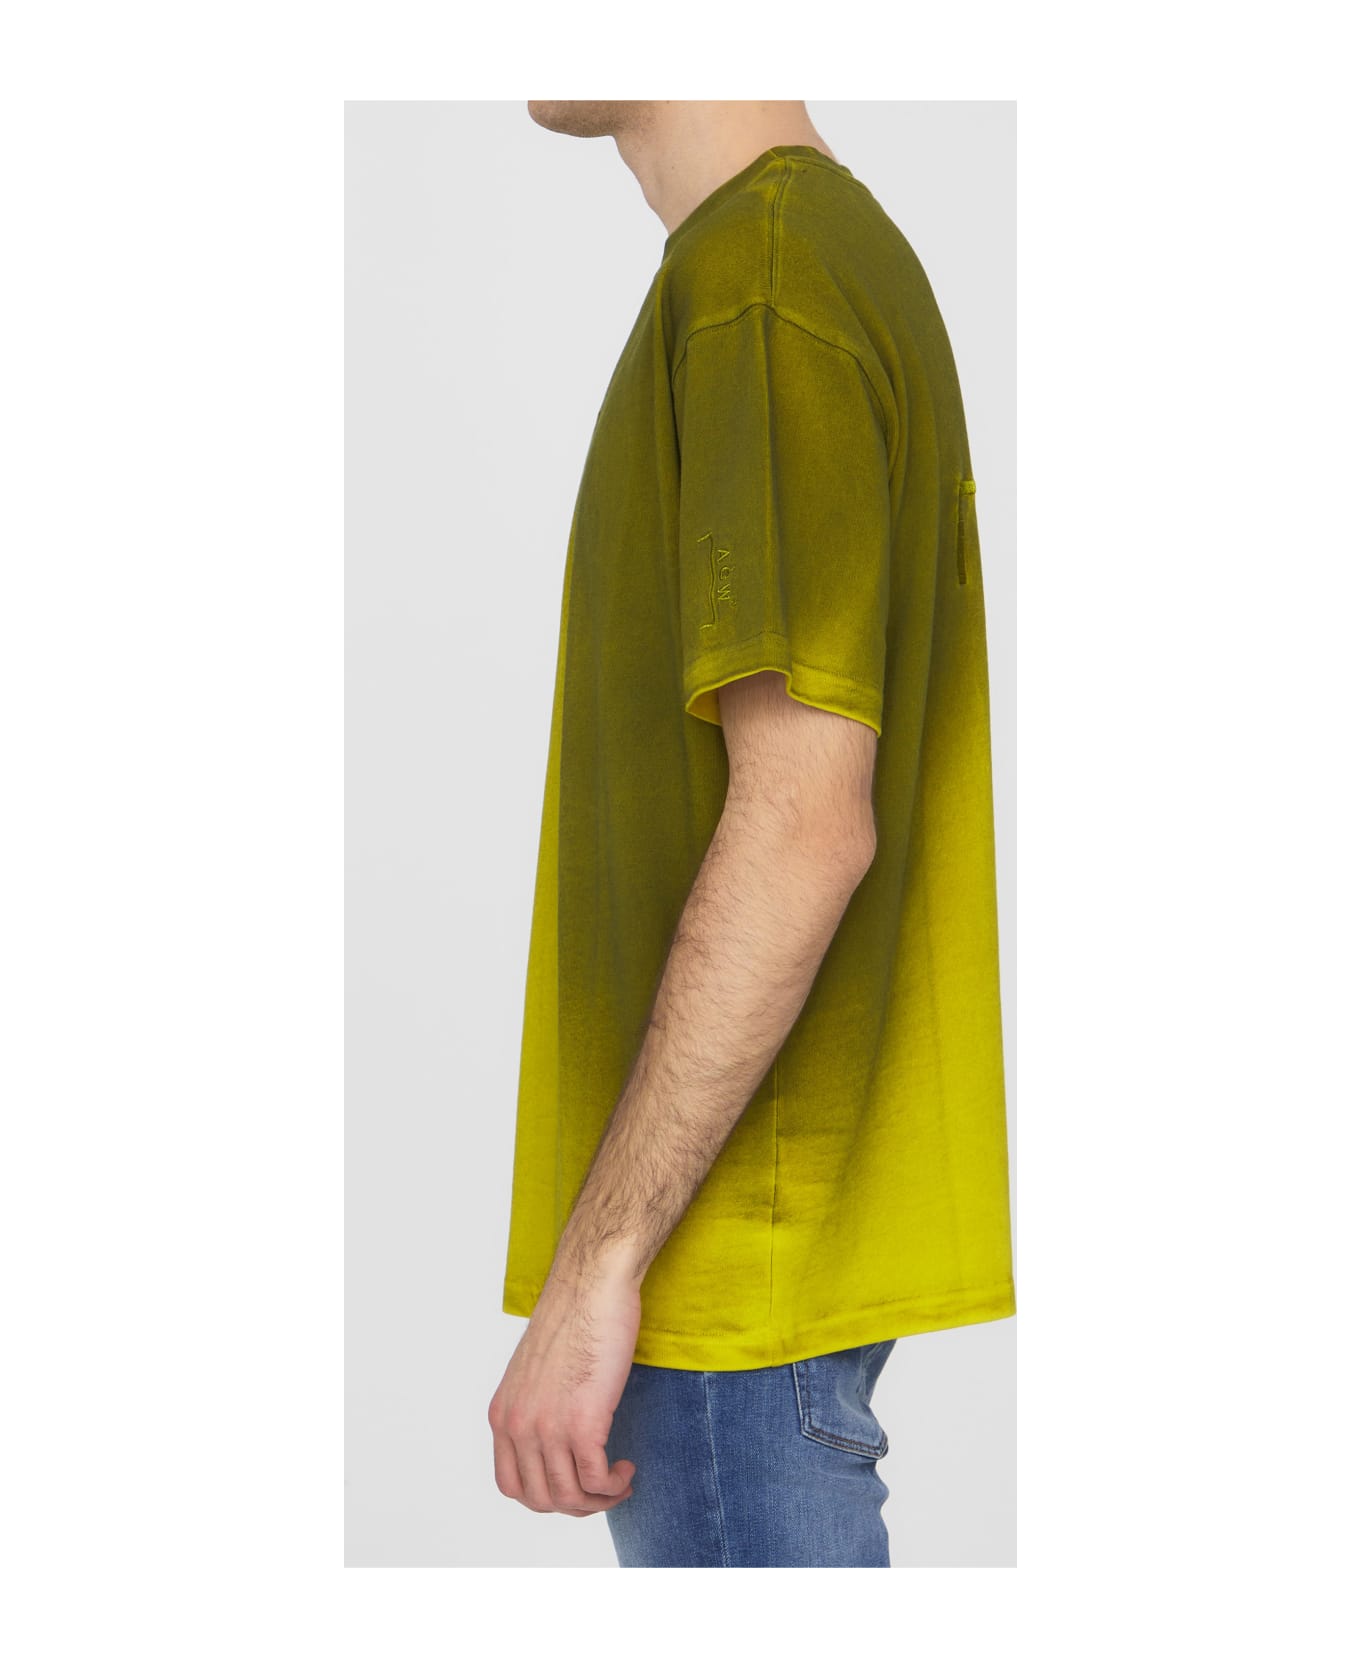 A-COLD-WALL Gradient T-shirt - YELLOW